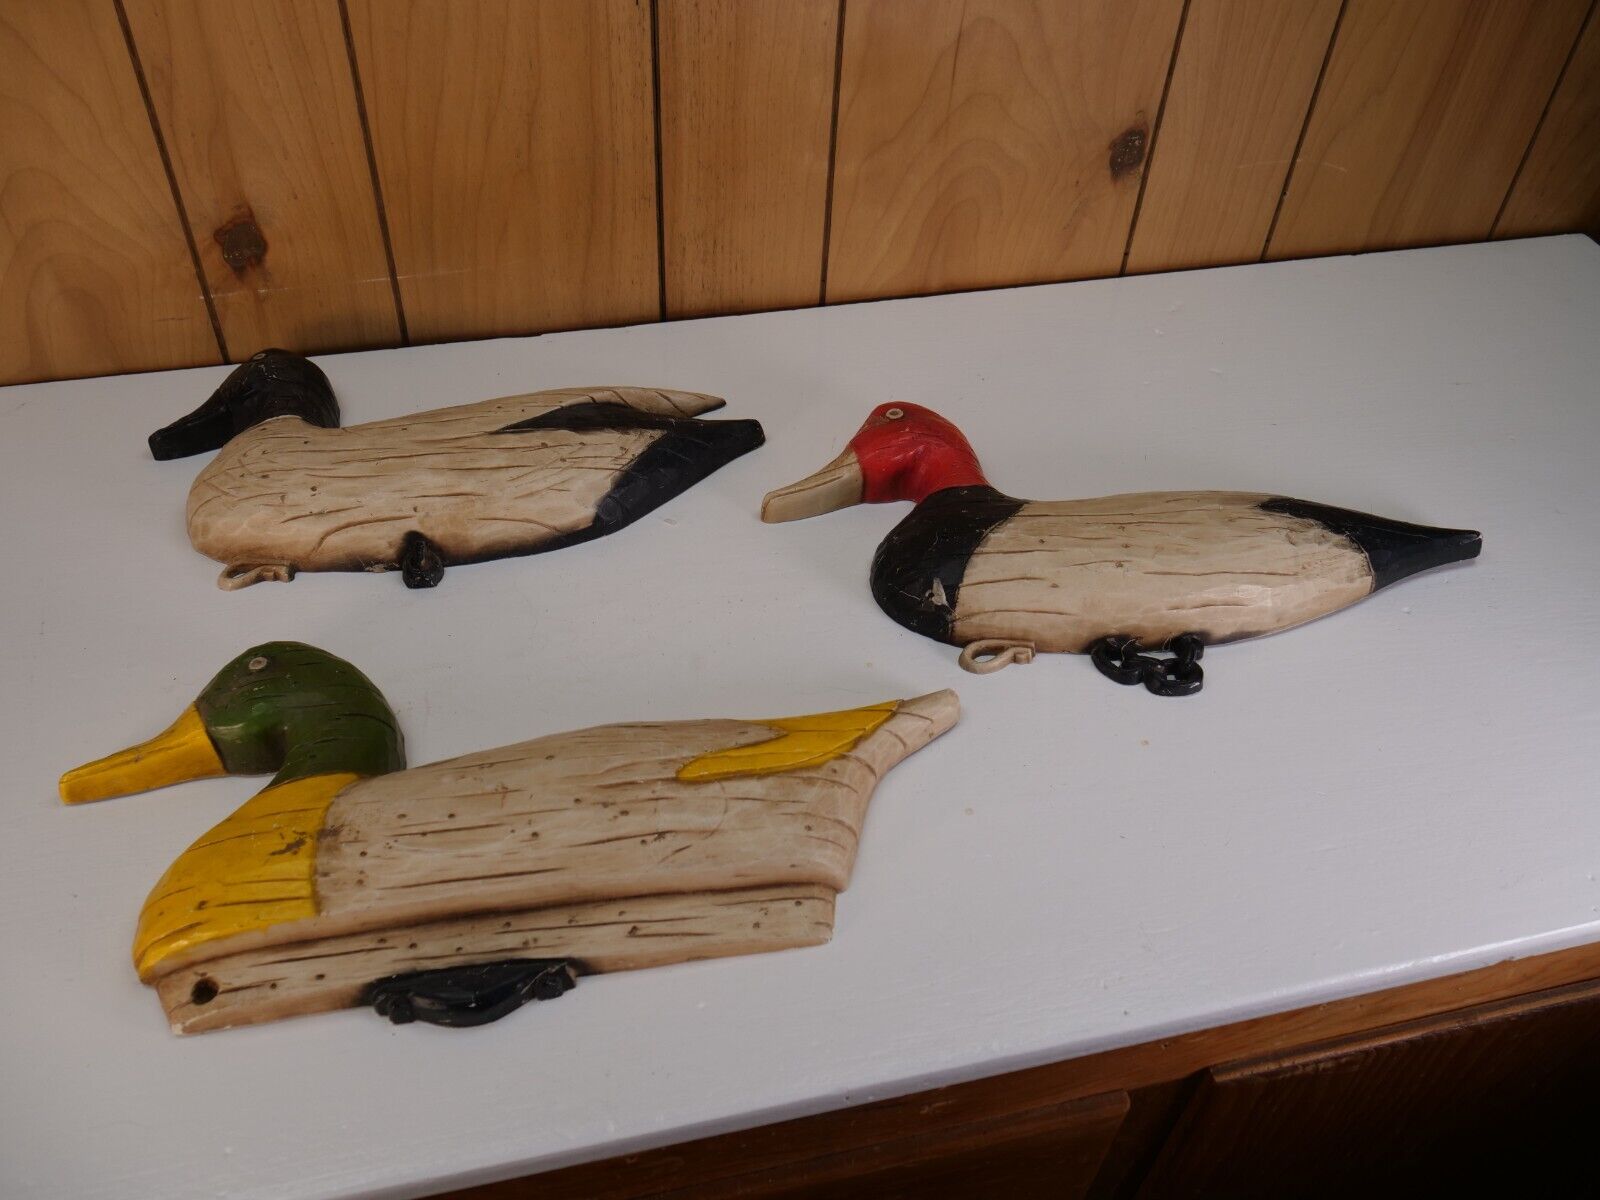 LOT OF 3 Vintage Syroco Duck Decoys Wall Hanging Lodge Cabin Decor USA